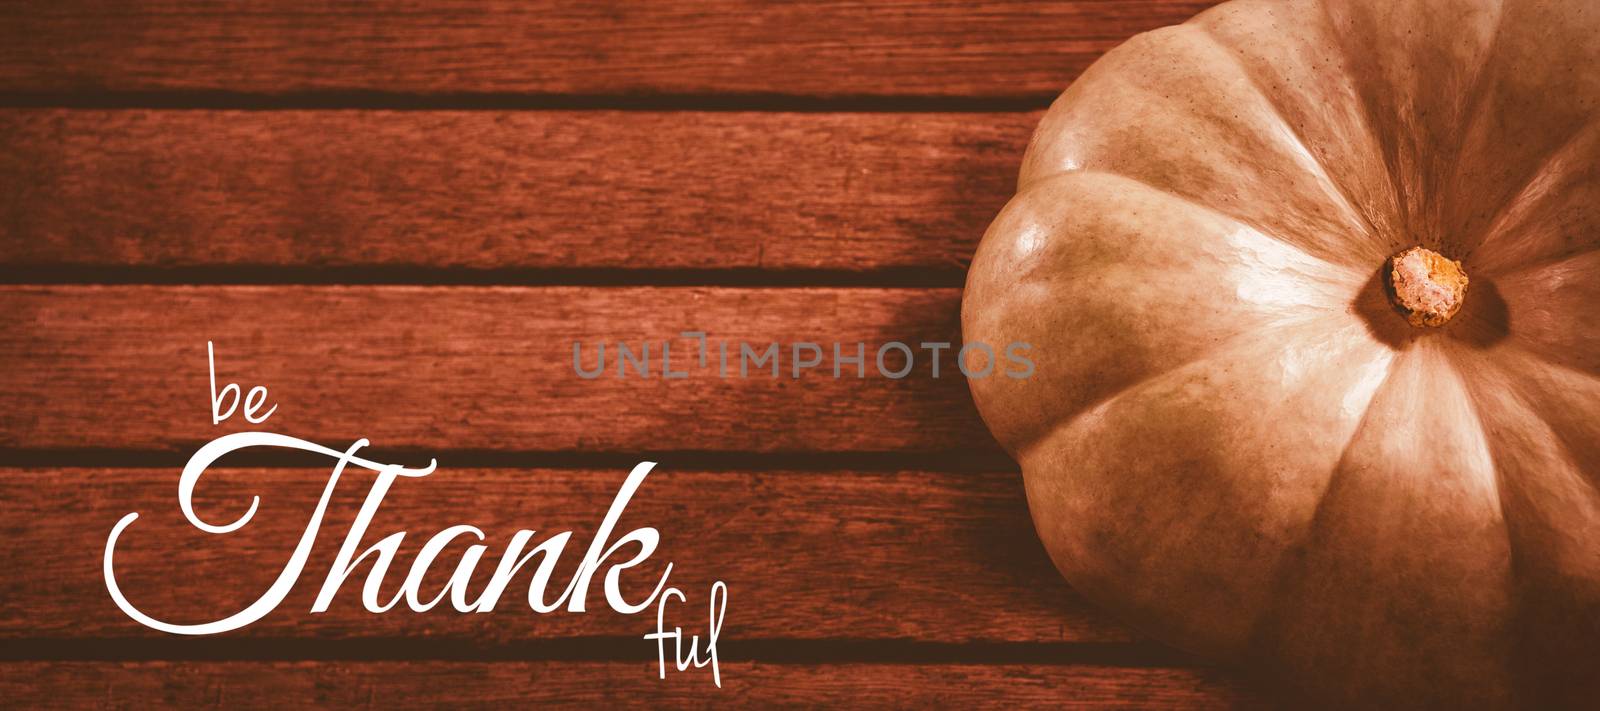 Digital image of happy thanksgiving day text greeting against white pumpkin on wooden table during halloween